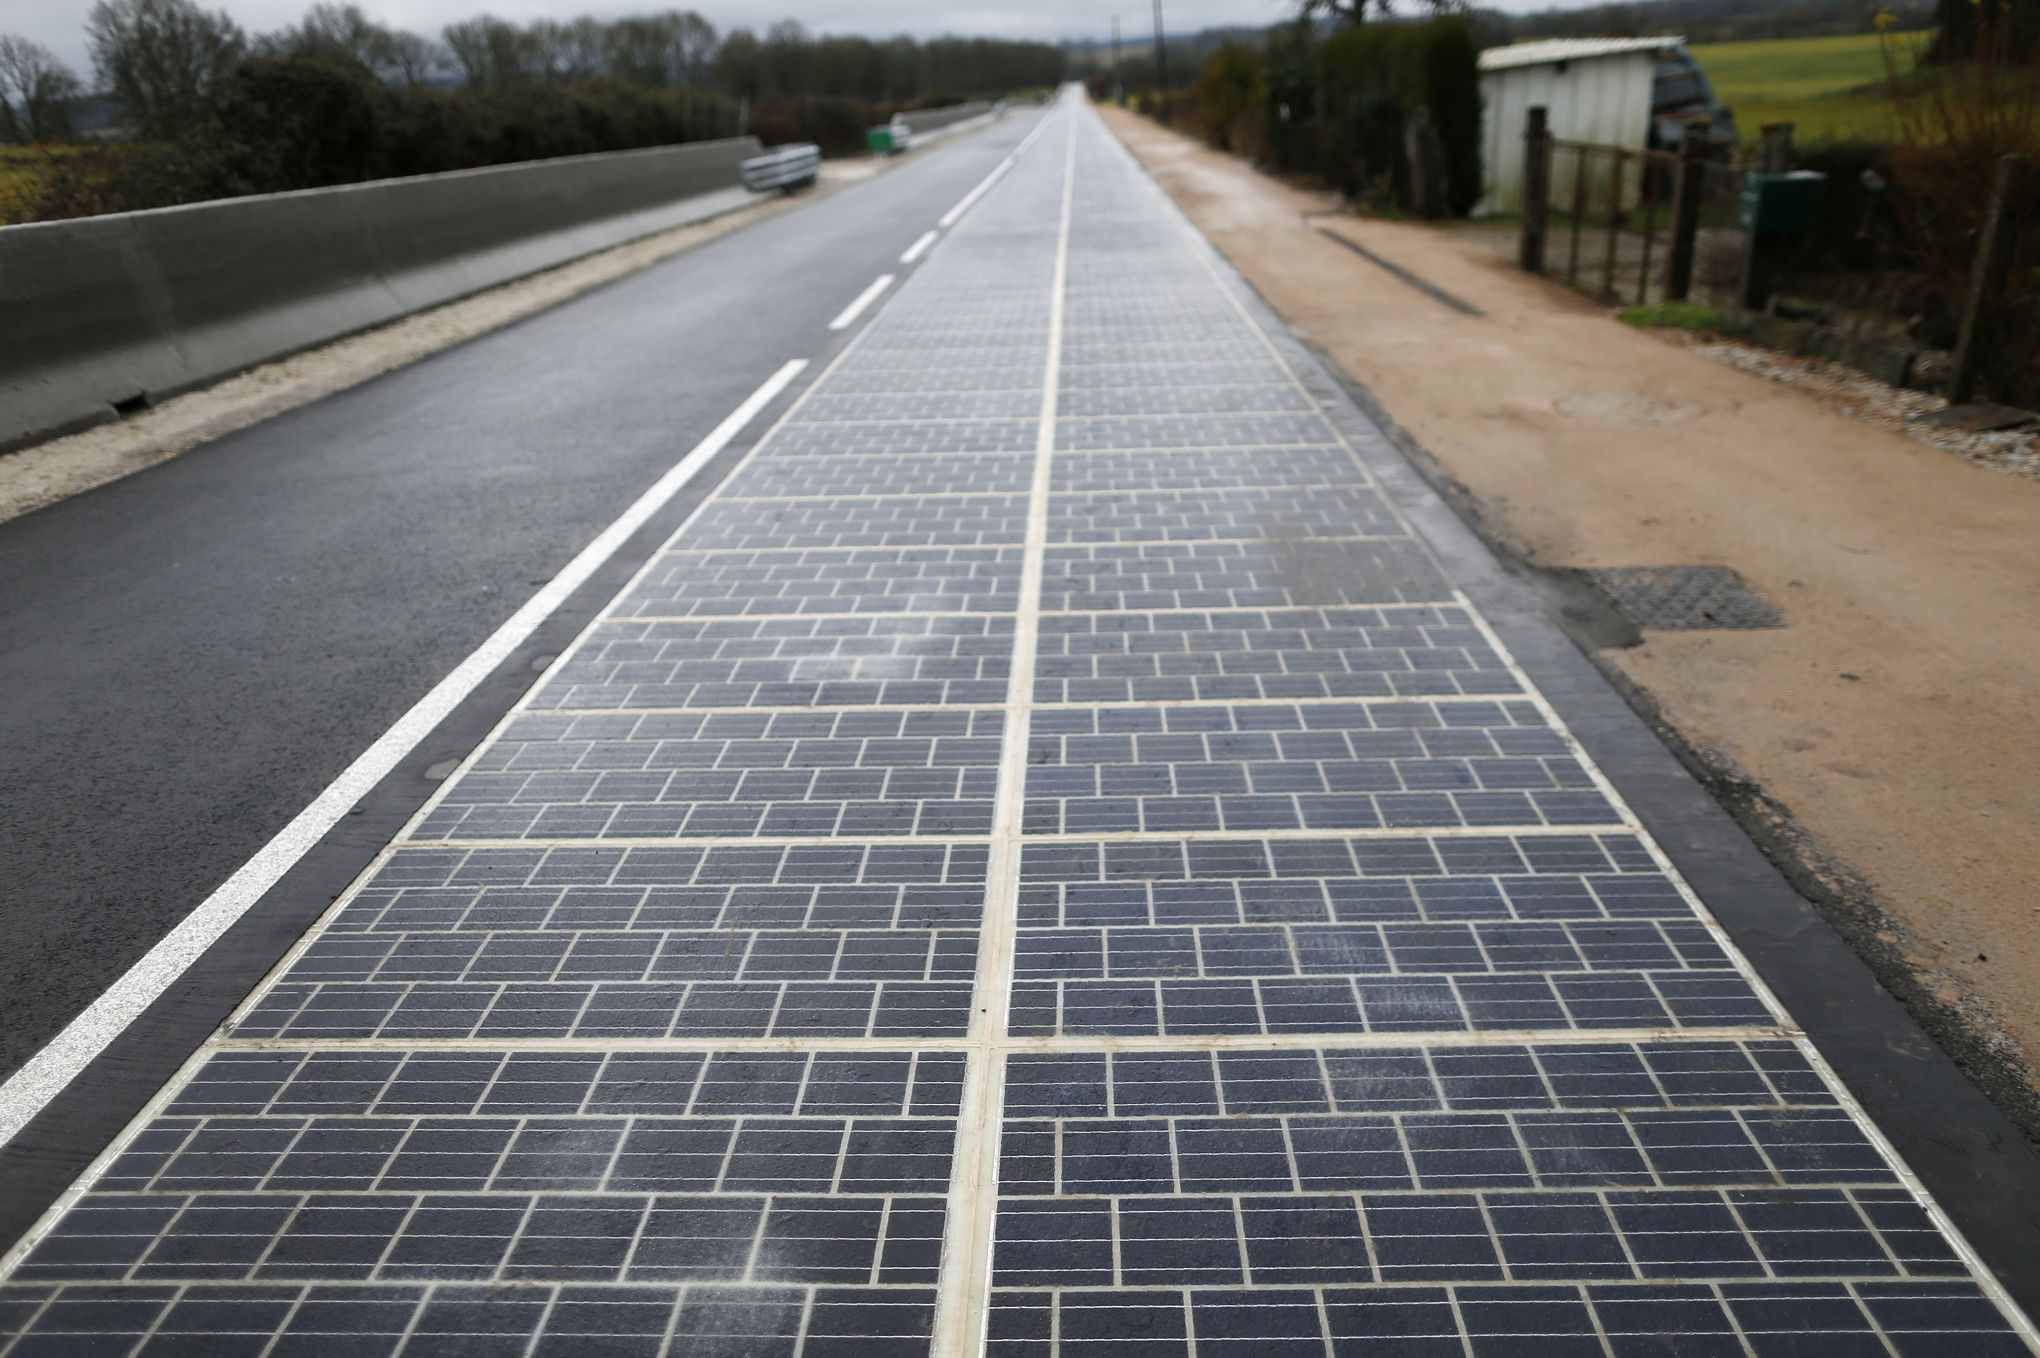 A solar panel road is pictured on December 22, 2016, following its inauguration in Tourouvre, Normandy, northwestern France. The world's first solar road was inaugurated on Thursday in Normandy, a technology the minister hopes will develop in France and abroad despite criticism of its high cost and profitability. / AFP PHOTO / CHARLY TRIBALLEAU